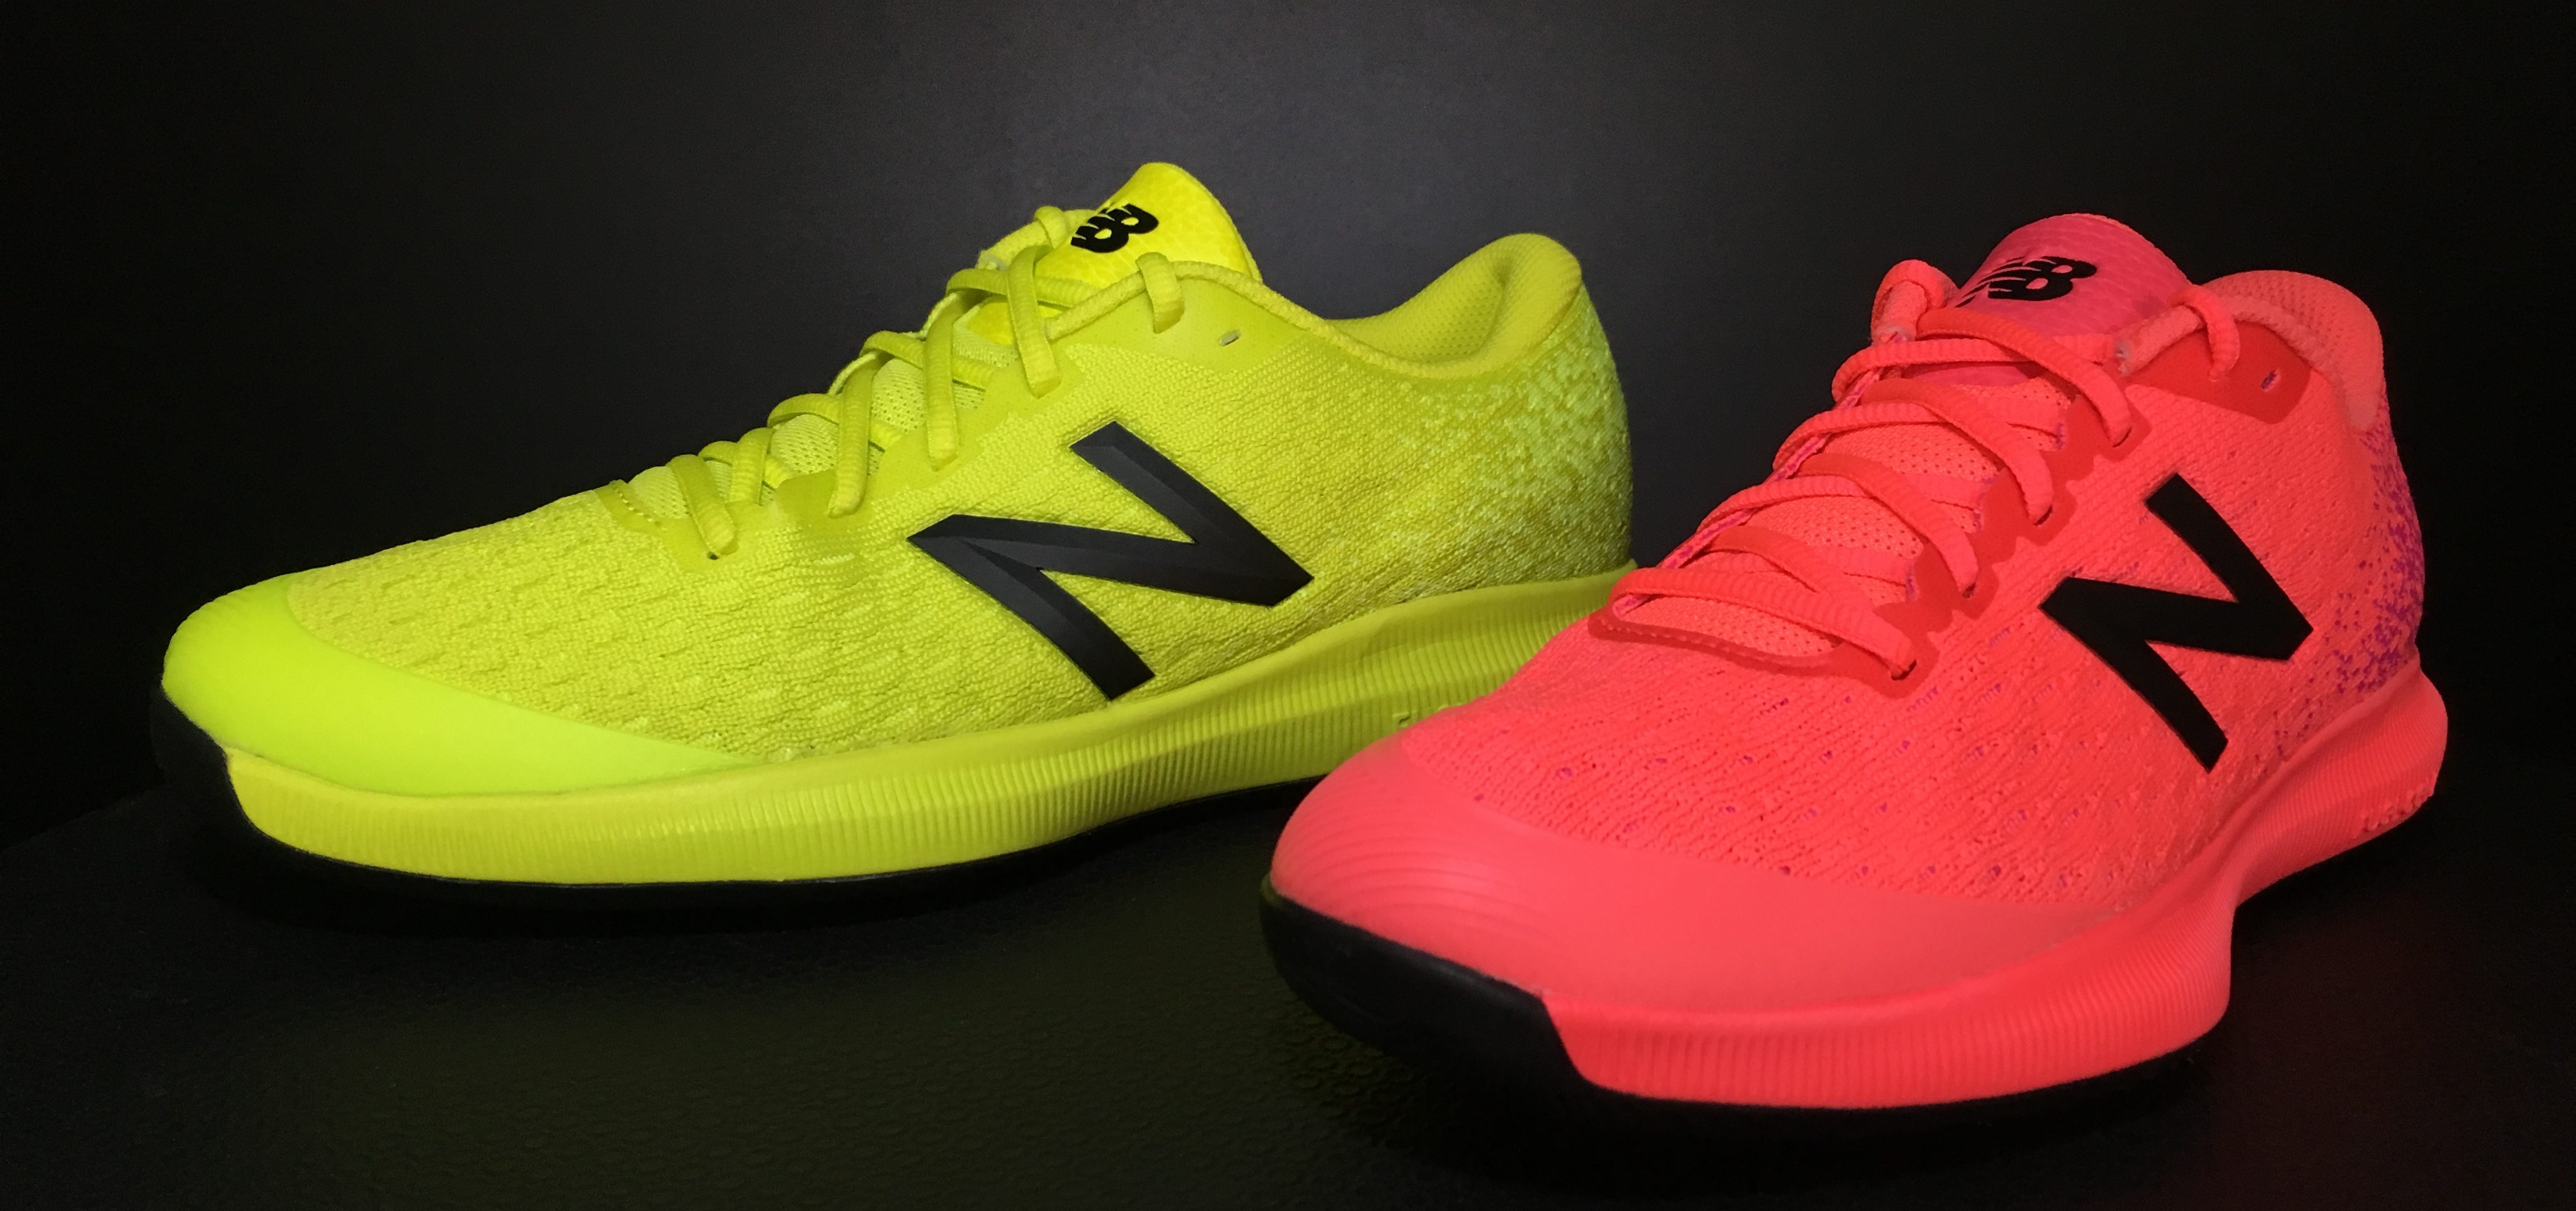 New Balance's FuelCell Comes to Tennis in the 996v4 - TENNIS EXPRESS BLOG